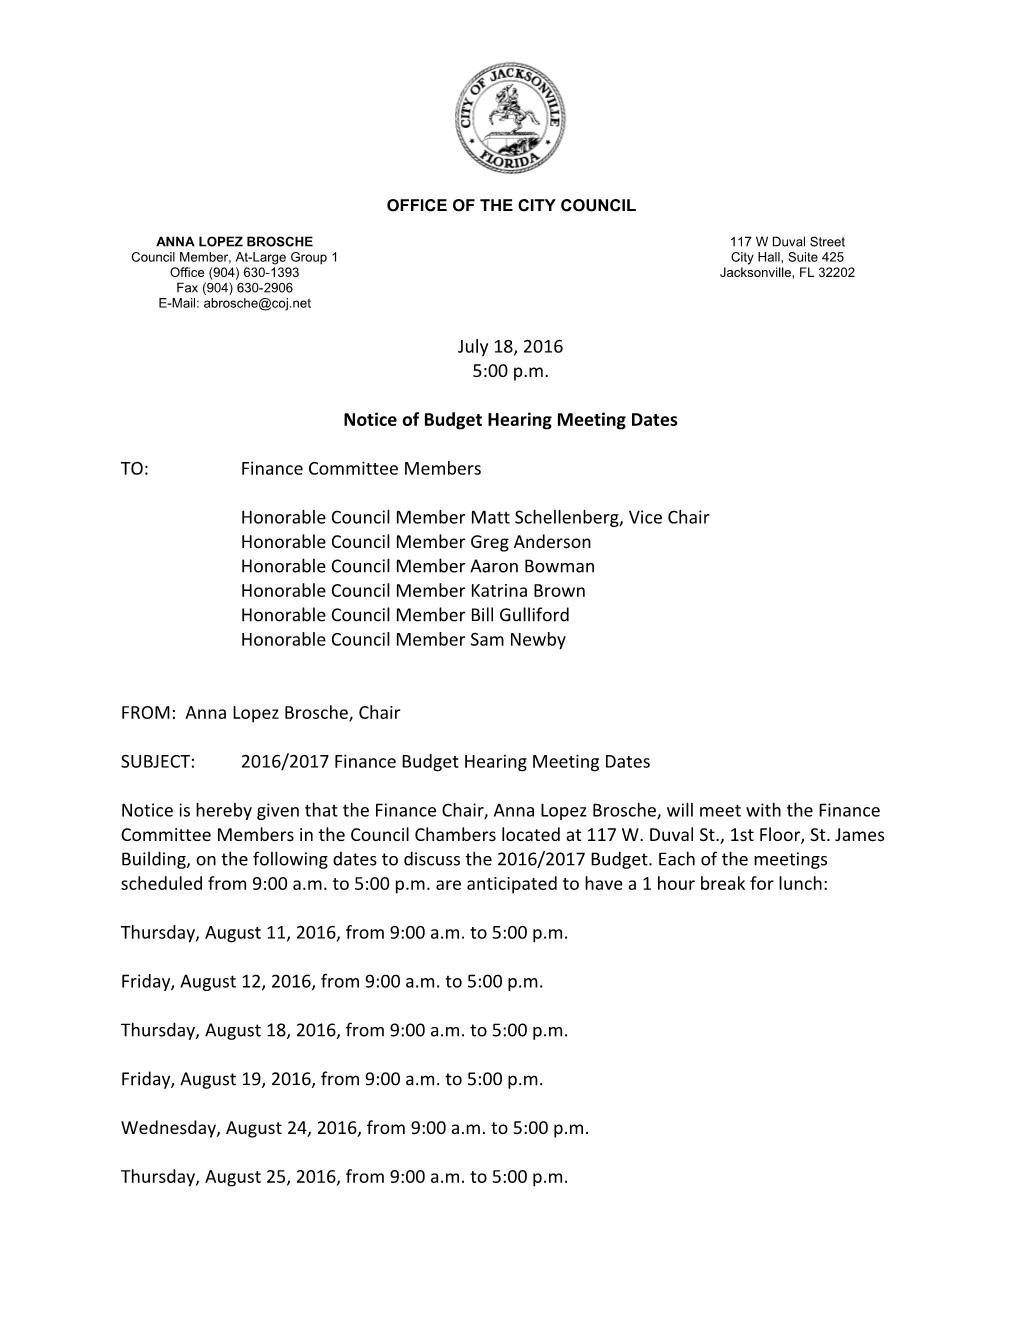 Notice of Budget Hearing Meeting Dates